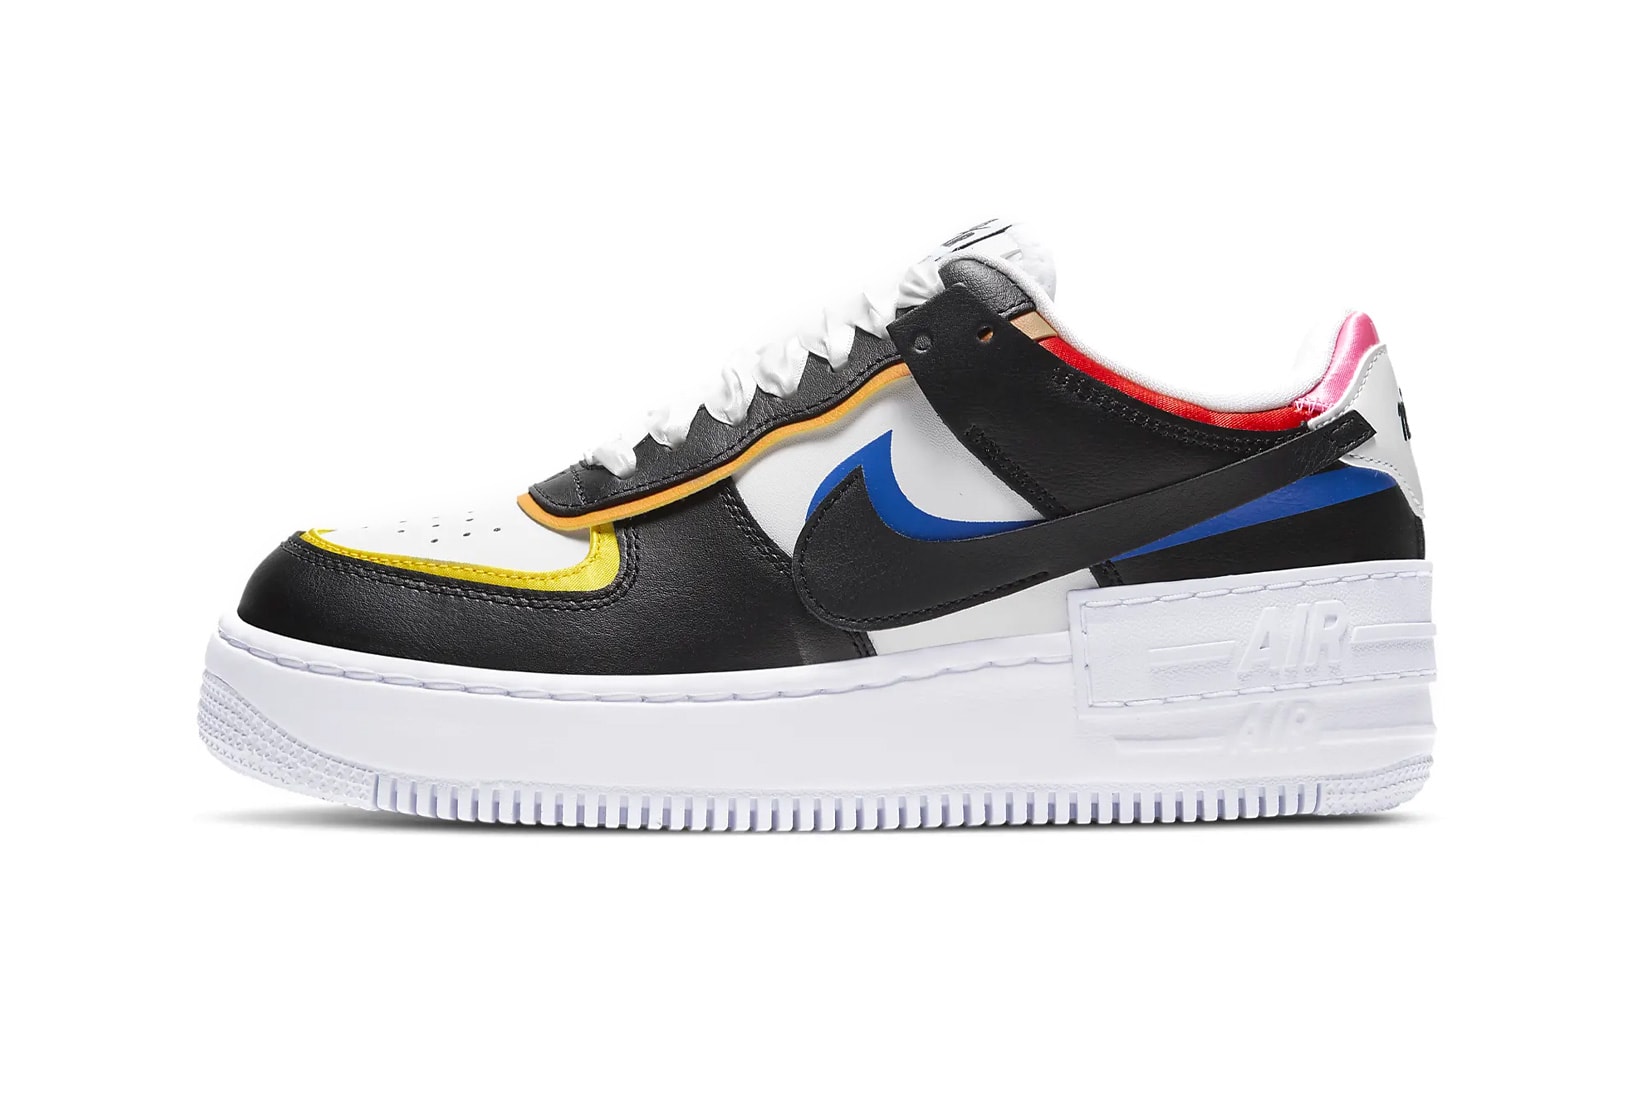 nike air force 1 af1 shadow pink glow chile red blue yellow orange womens sneakers price 